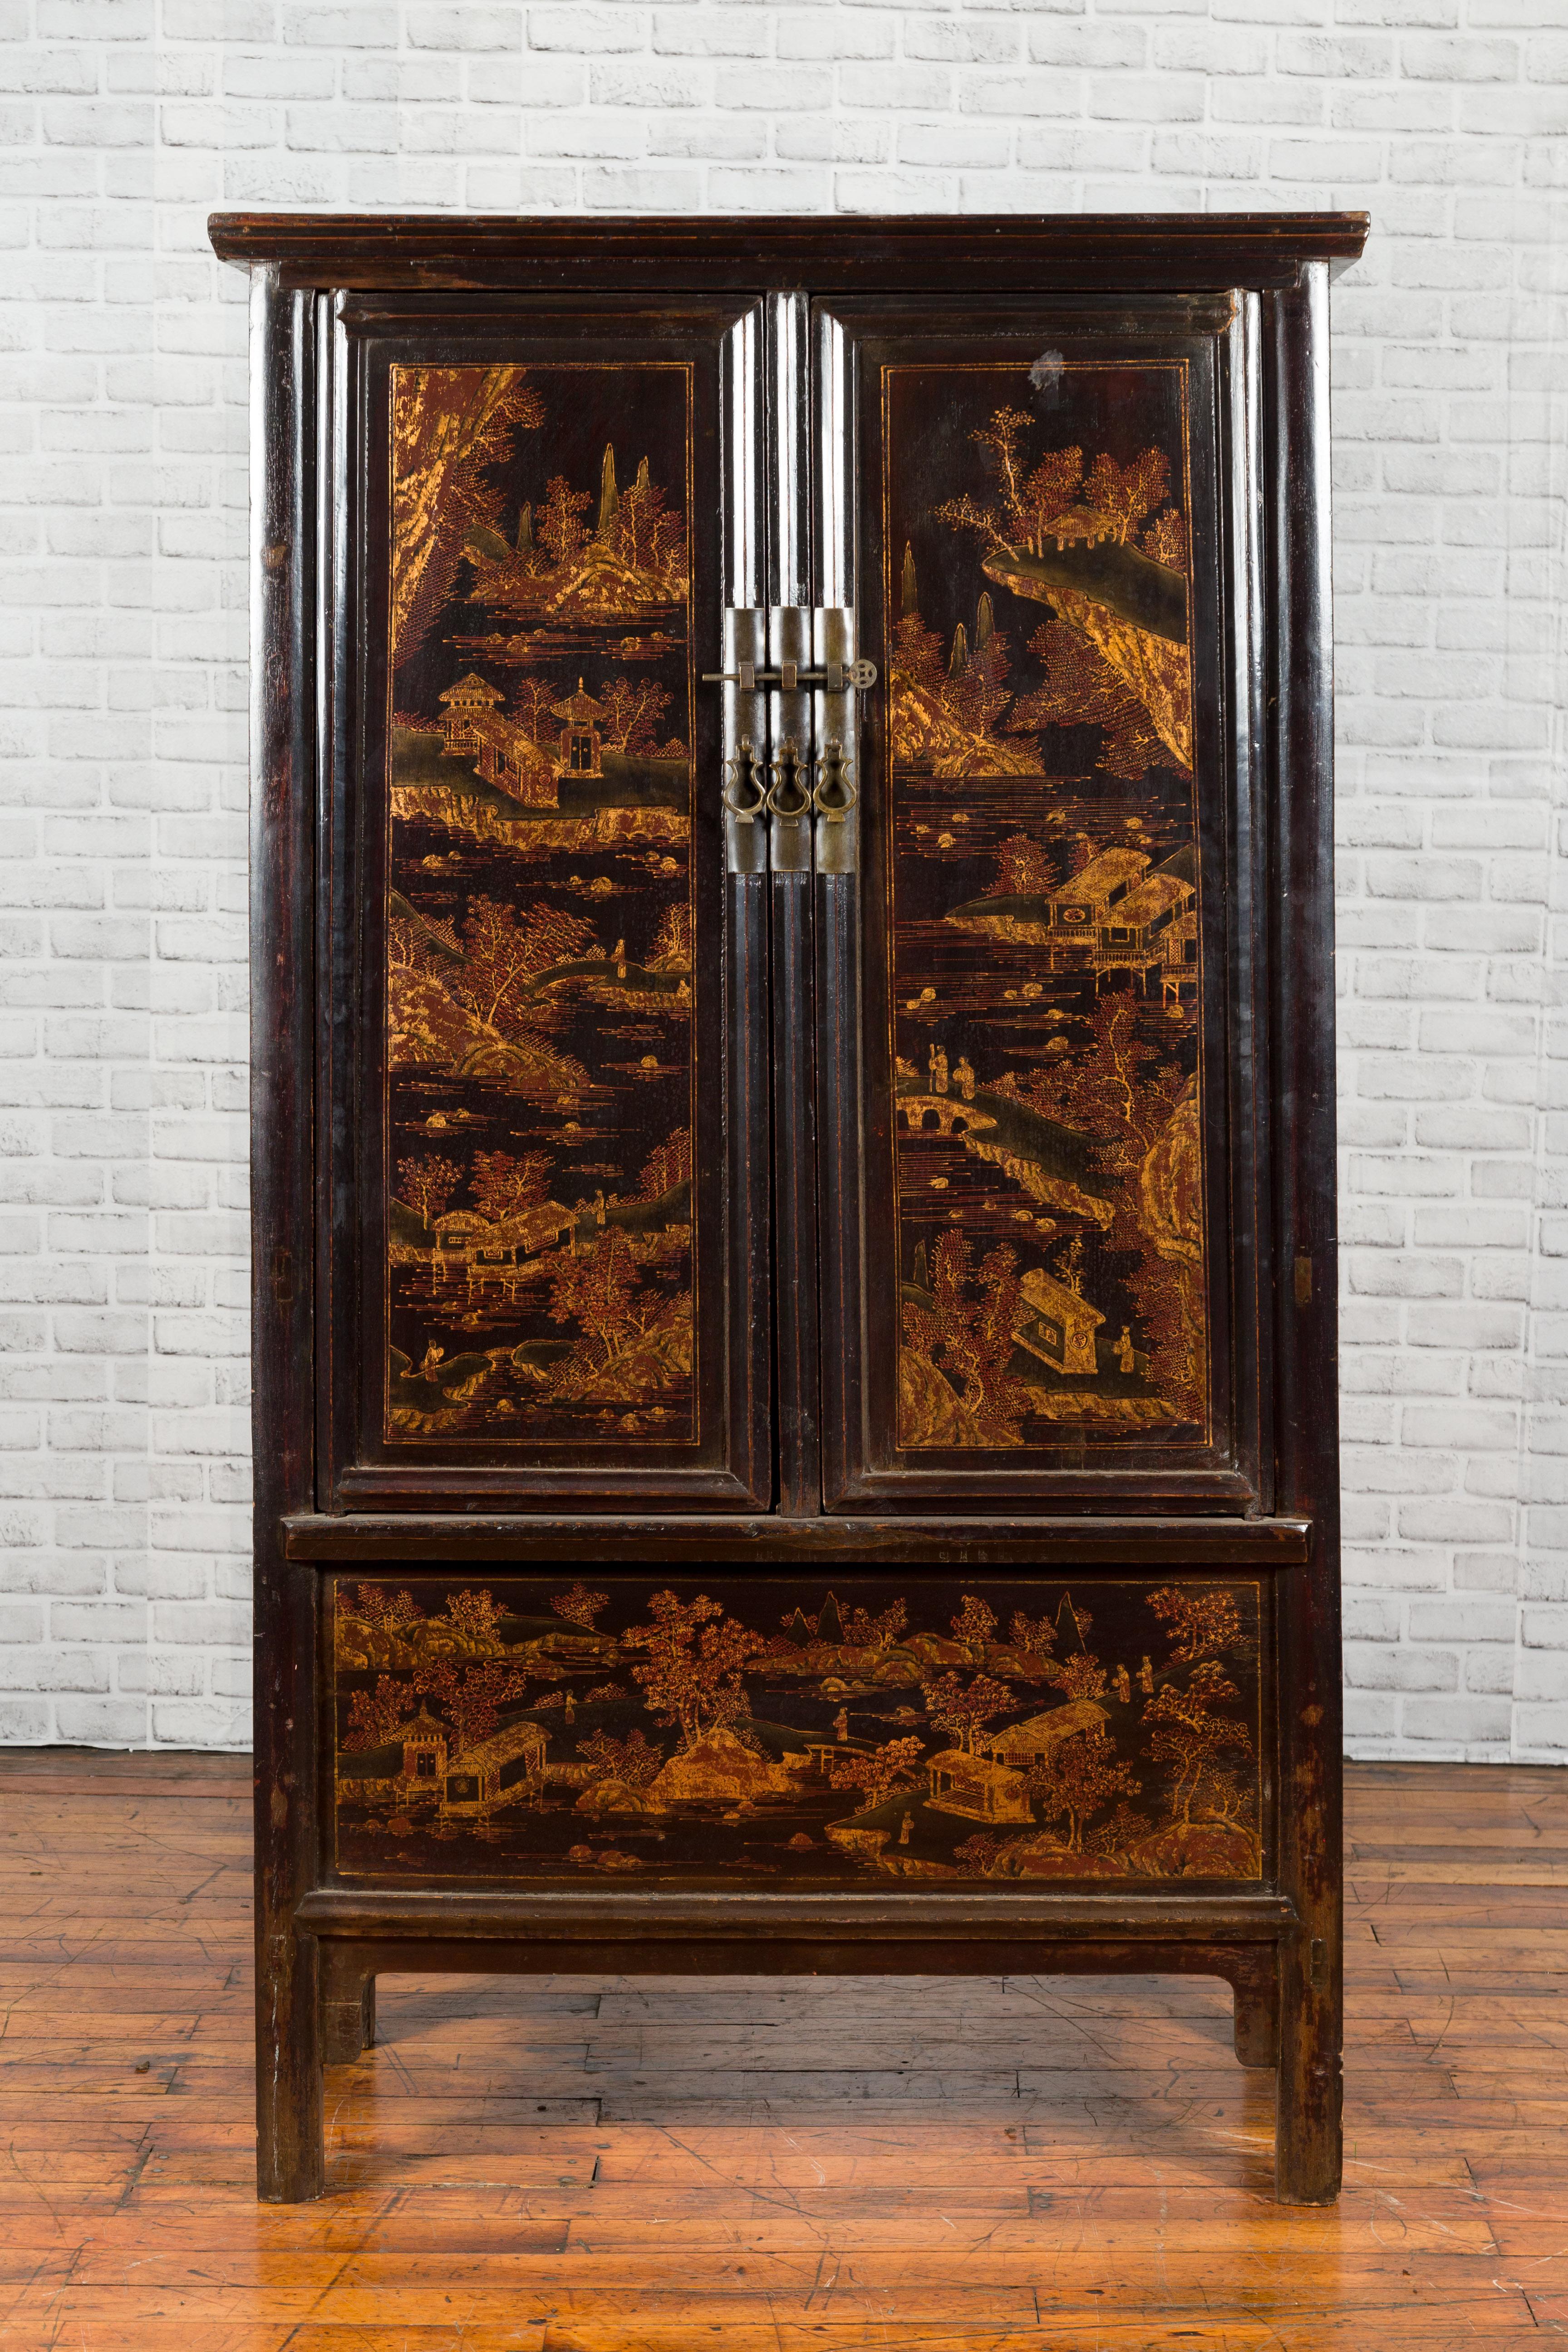 A Chinese Qing dynasty period Shanxi black lacquer cabinet from the 19th century, with chinoiserie decor and two hidden drawers. Created in the North-Eastern province of Shanxi during the Qing dynasty, this 19th century cabinet features a black